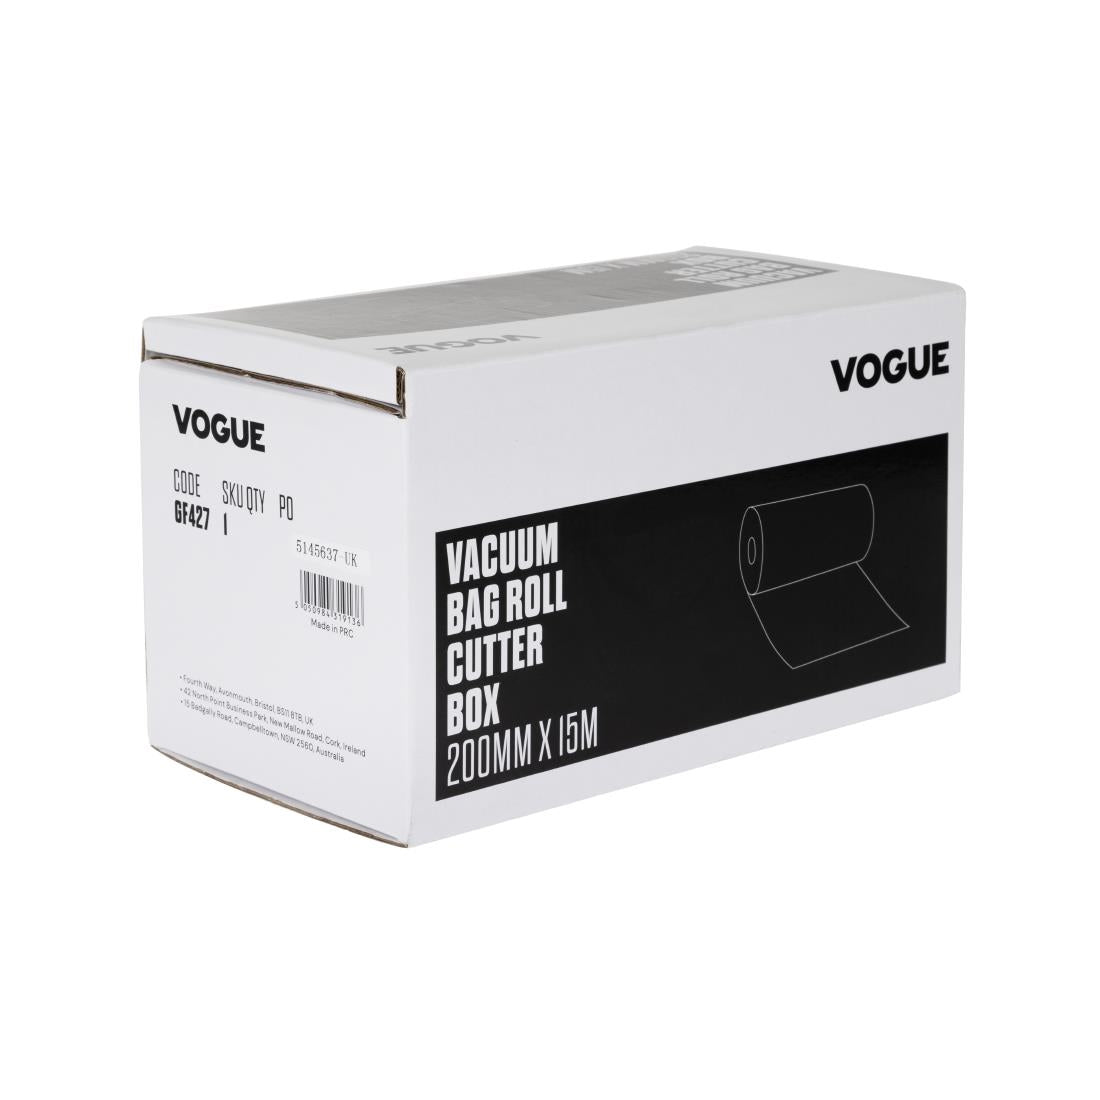 GF427 Vogue Vacuum Pack Roll with Cutter Box 15m JD Catering Equipment Solutions Ltd